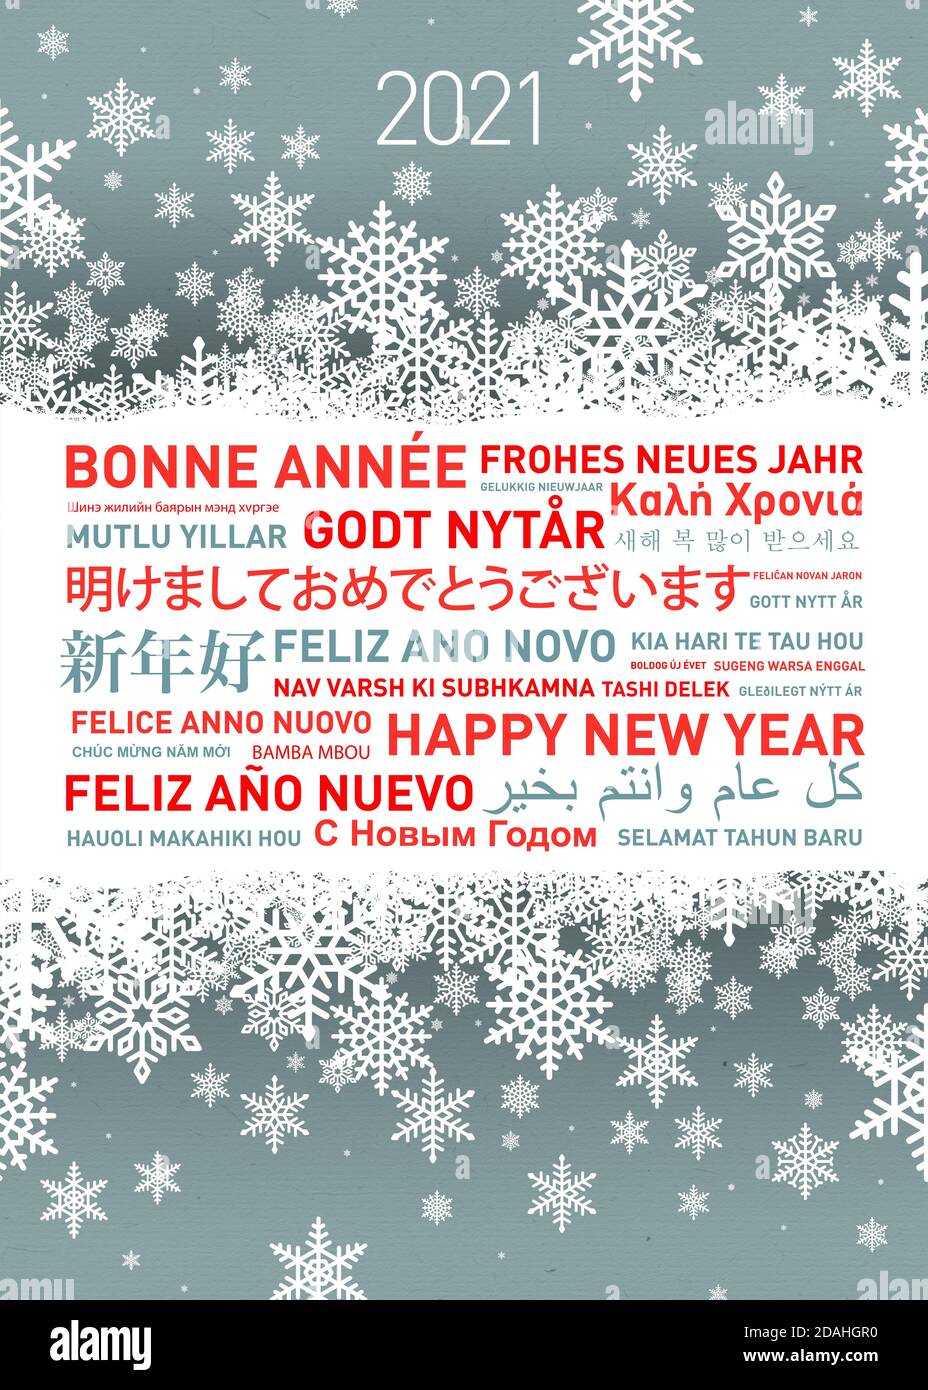 Happy new year greetings card in different world languages. 2021 Stock Photo